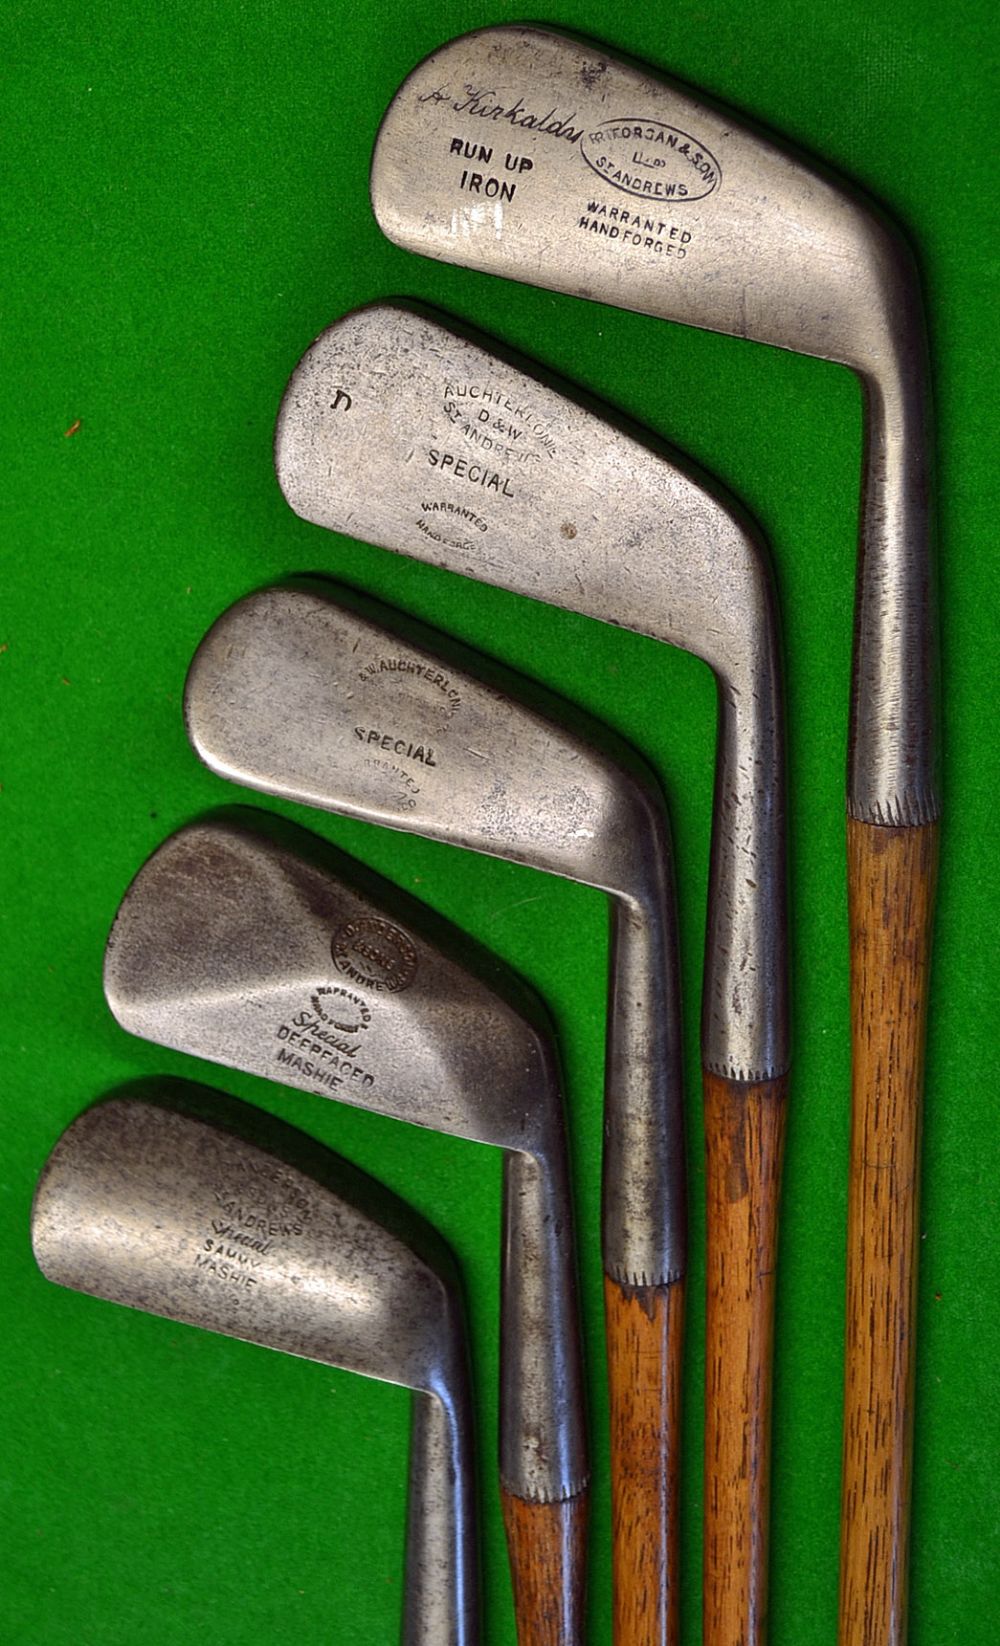 5x Iron from St Andrews Makers - an Anderson Sammy Mashie, an Auchterlonie mid iron, an Anderson